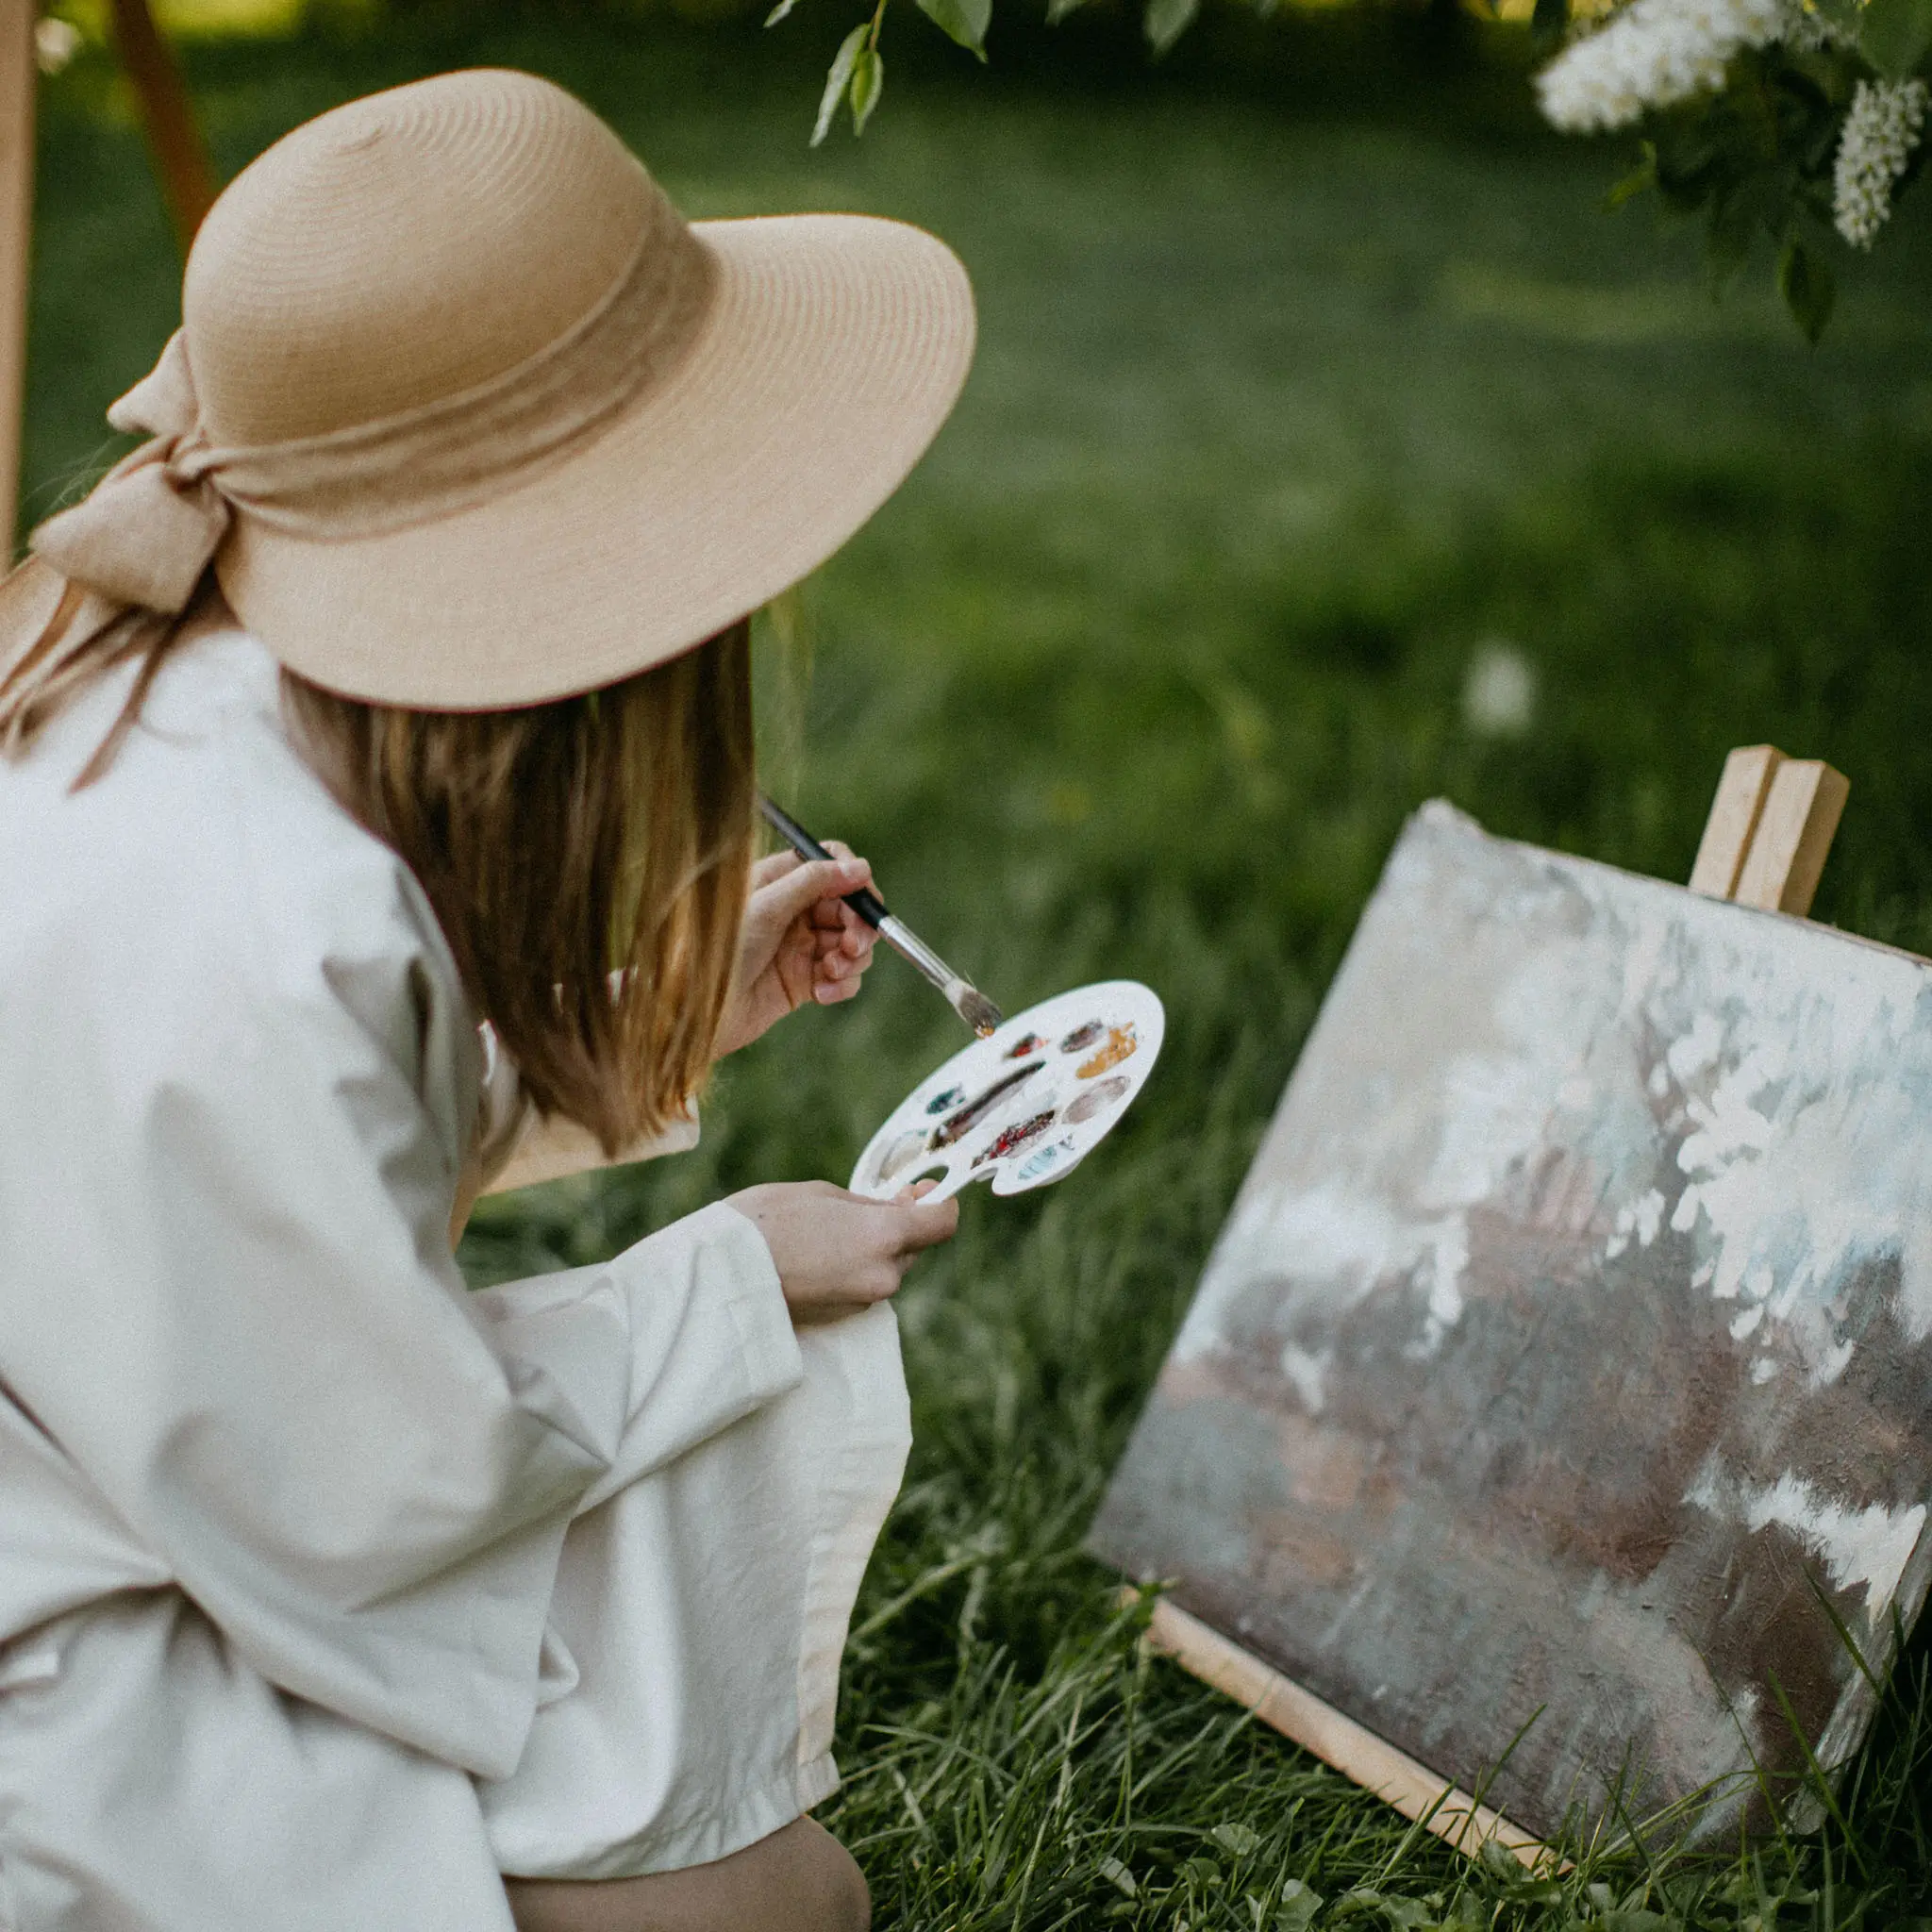 A woman wearing a large hat and painting on a canvas in the grass.